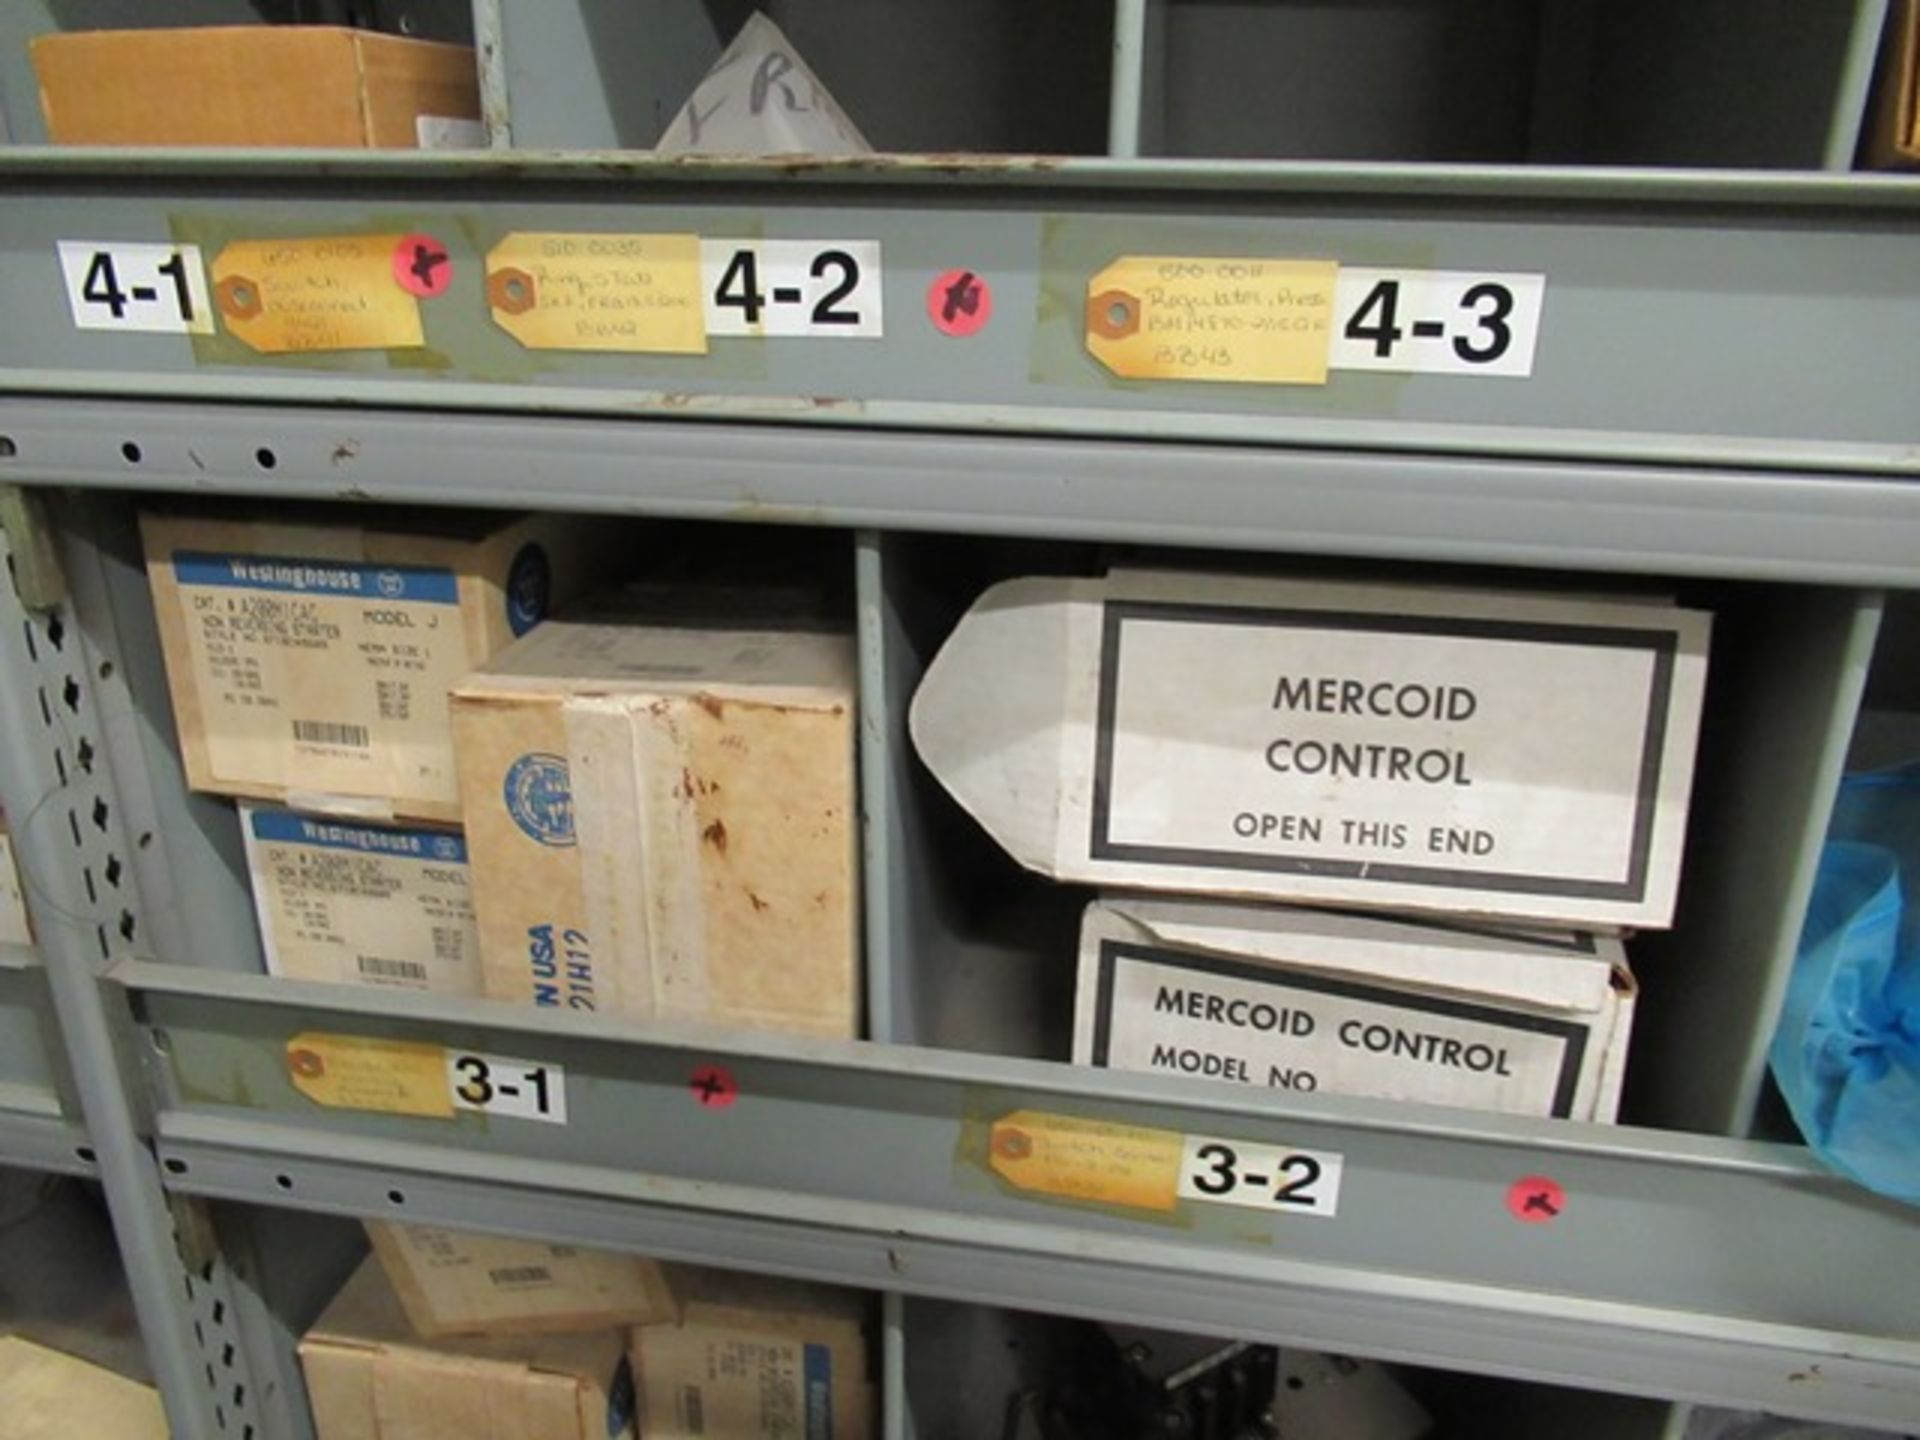 LOT ASST. CLEAVER BROOKS, SULLARI BAILEY PARTS, METERS, FILTERS, ETC. 3 SECTIONS SHELVING (M-S) - Image 4 of 5